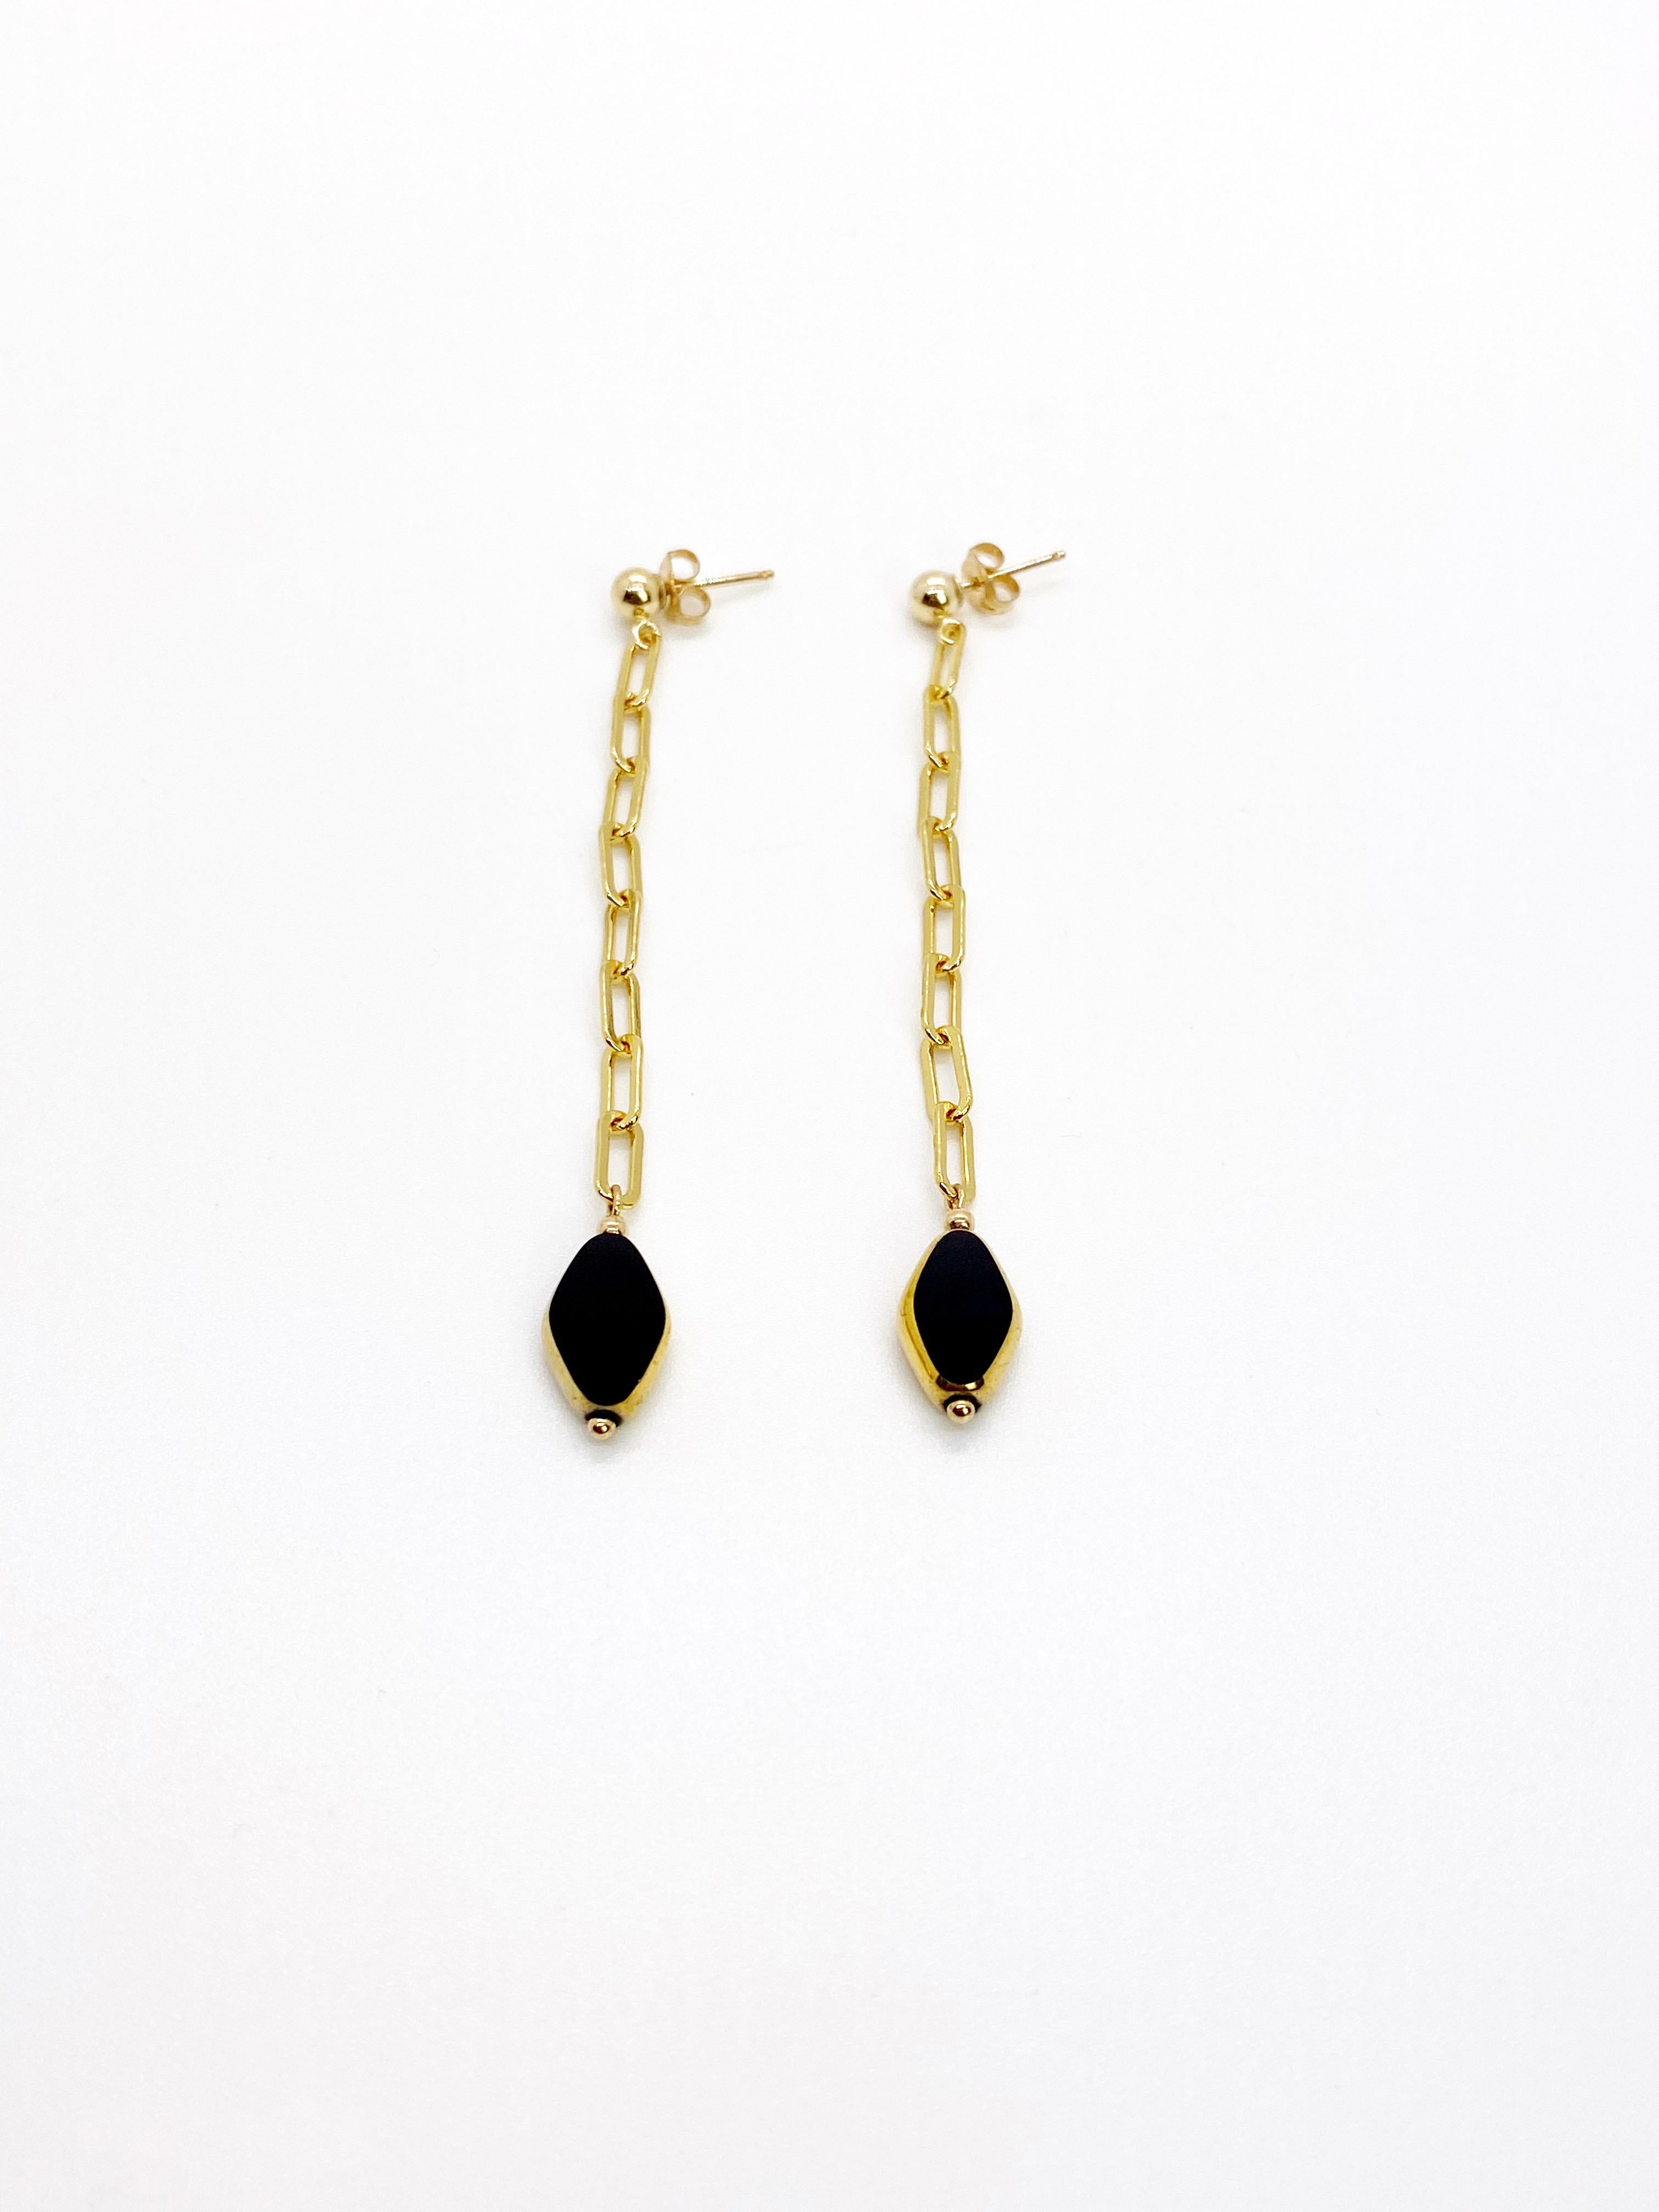 Black diamond shaped vintage German glass beads edged with 24K gold on 14K gold-filled chains and ear studs.

The vintage German glass beads are considered rare and collectible, circa 1920s-1960s.

*Our jewelry have maximum protection for